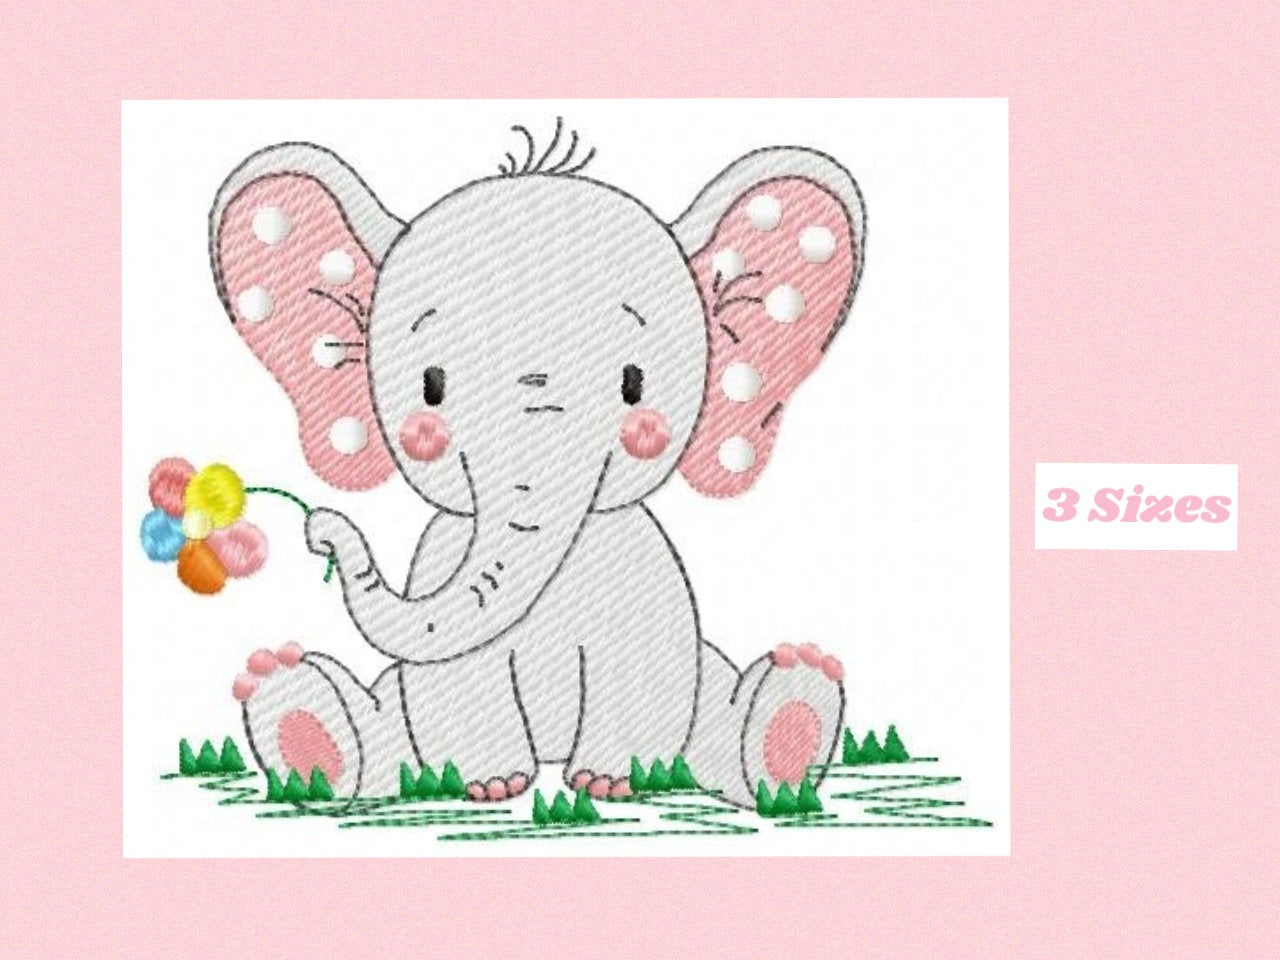 Animal Embroidery Patterns Elephant Embroidery Designs Animal Embroidery Design Machine Embroidery Pattern Ba Embroidery File Kid Embroidery Elephant Design